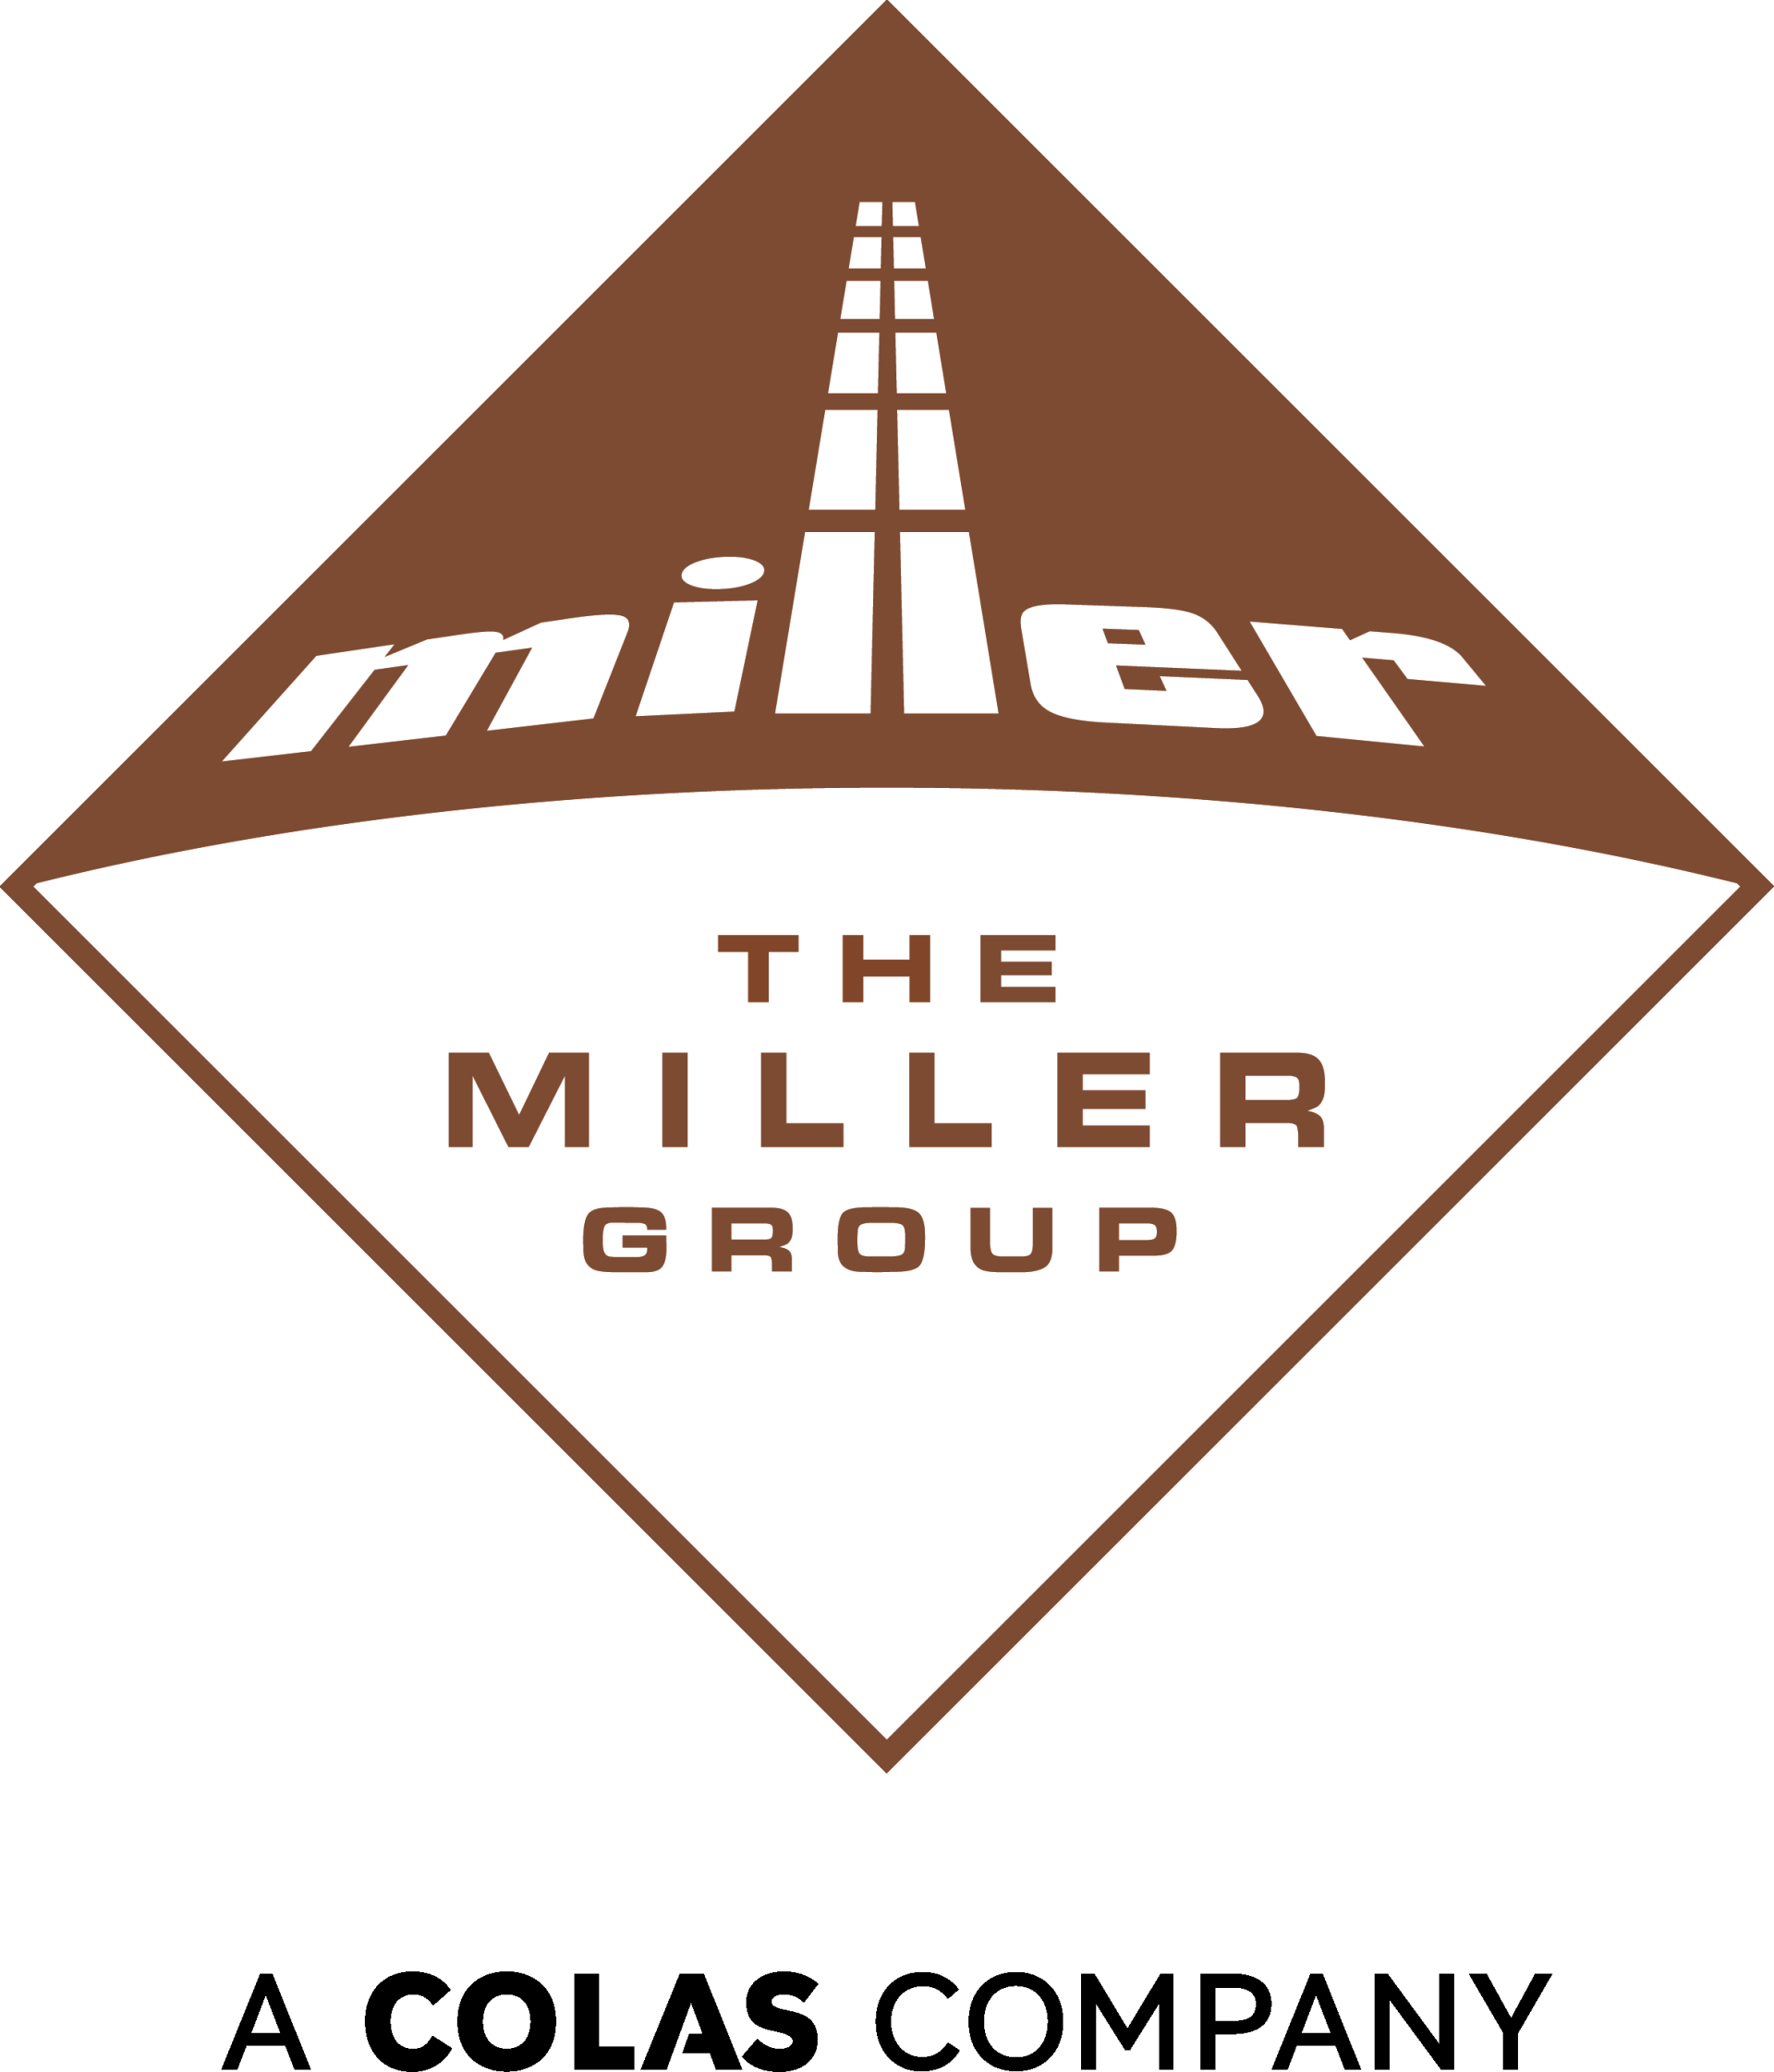 Miller Waste Systems